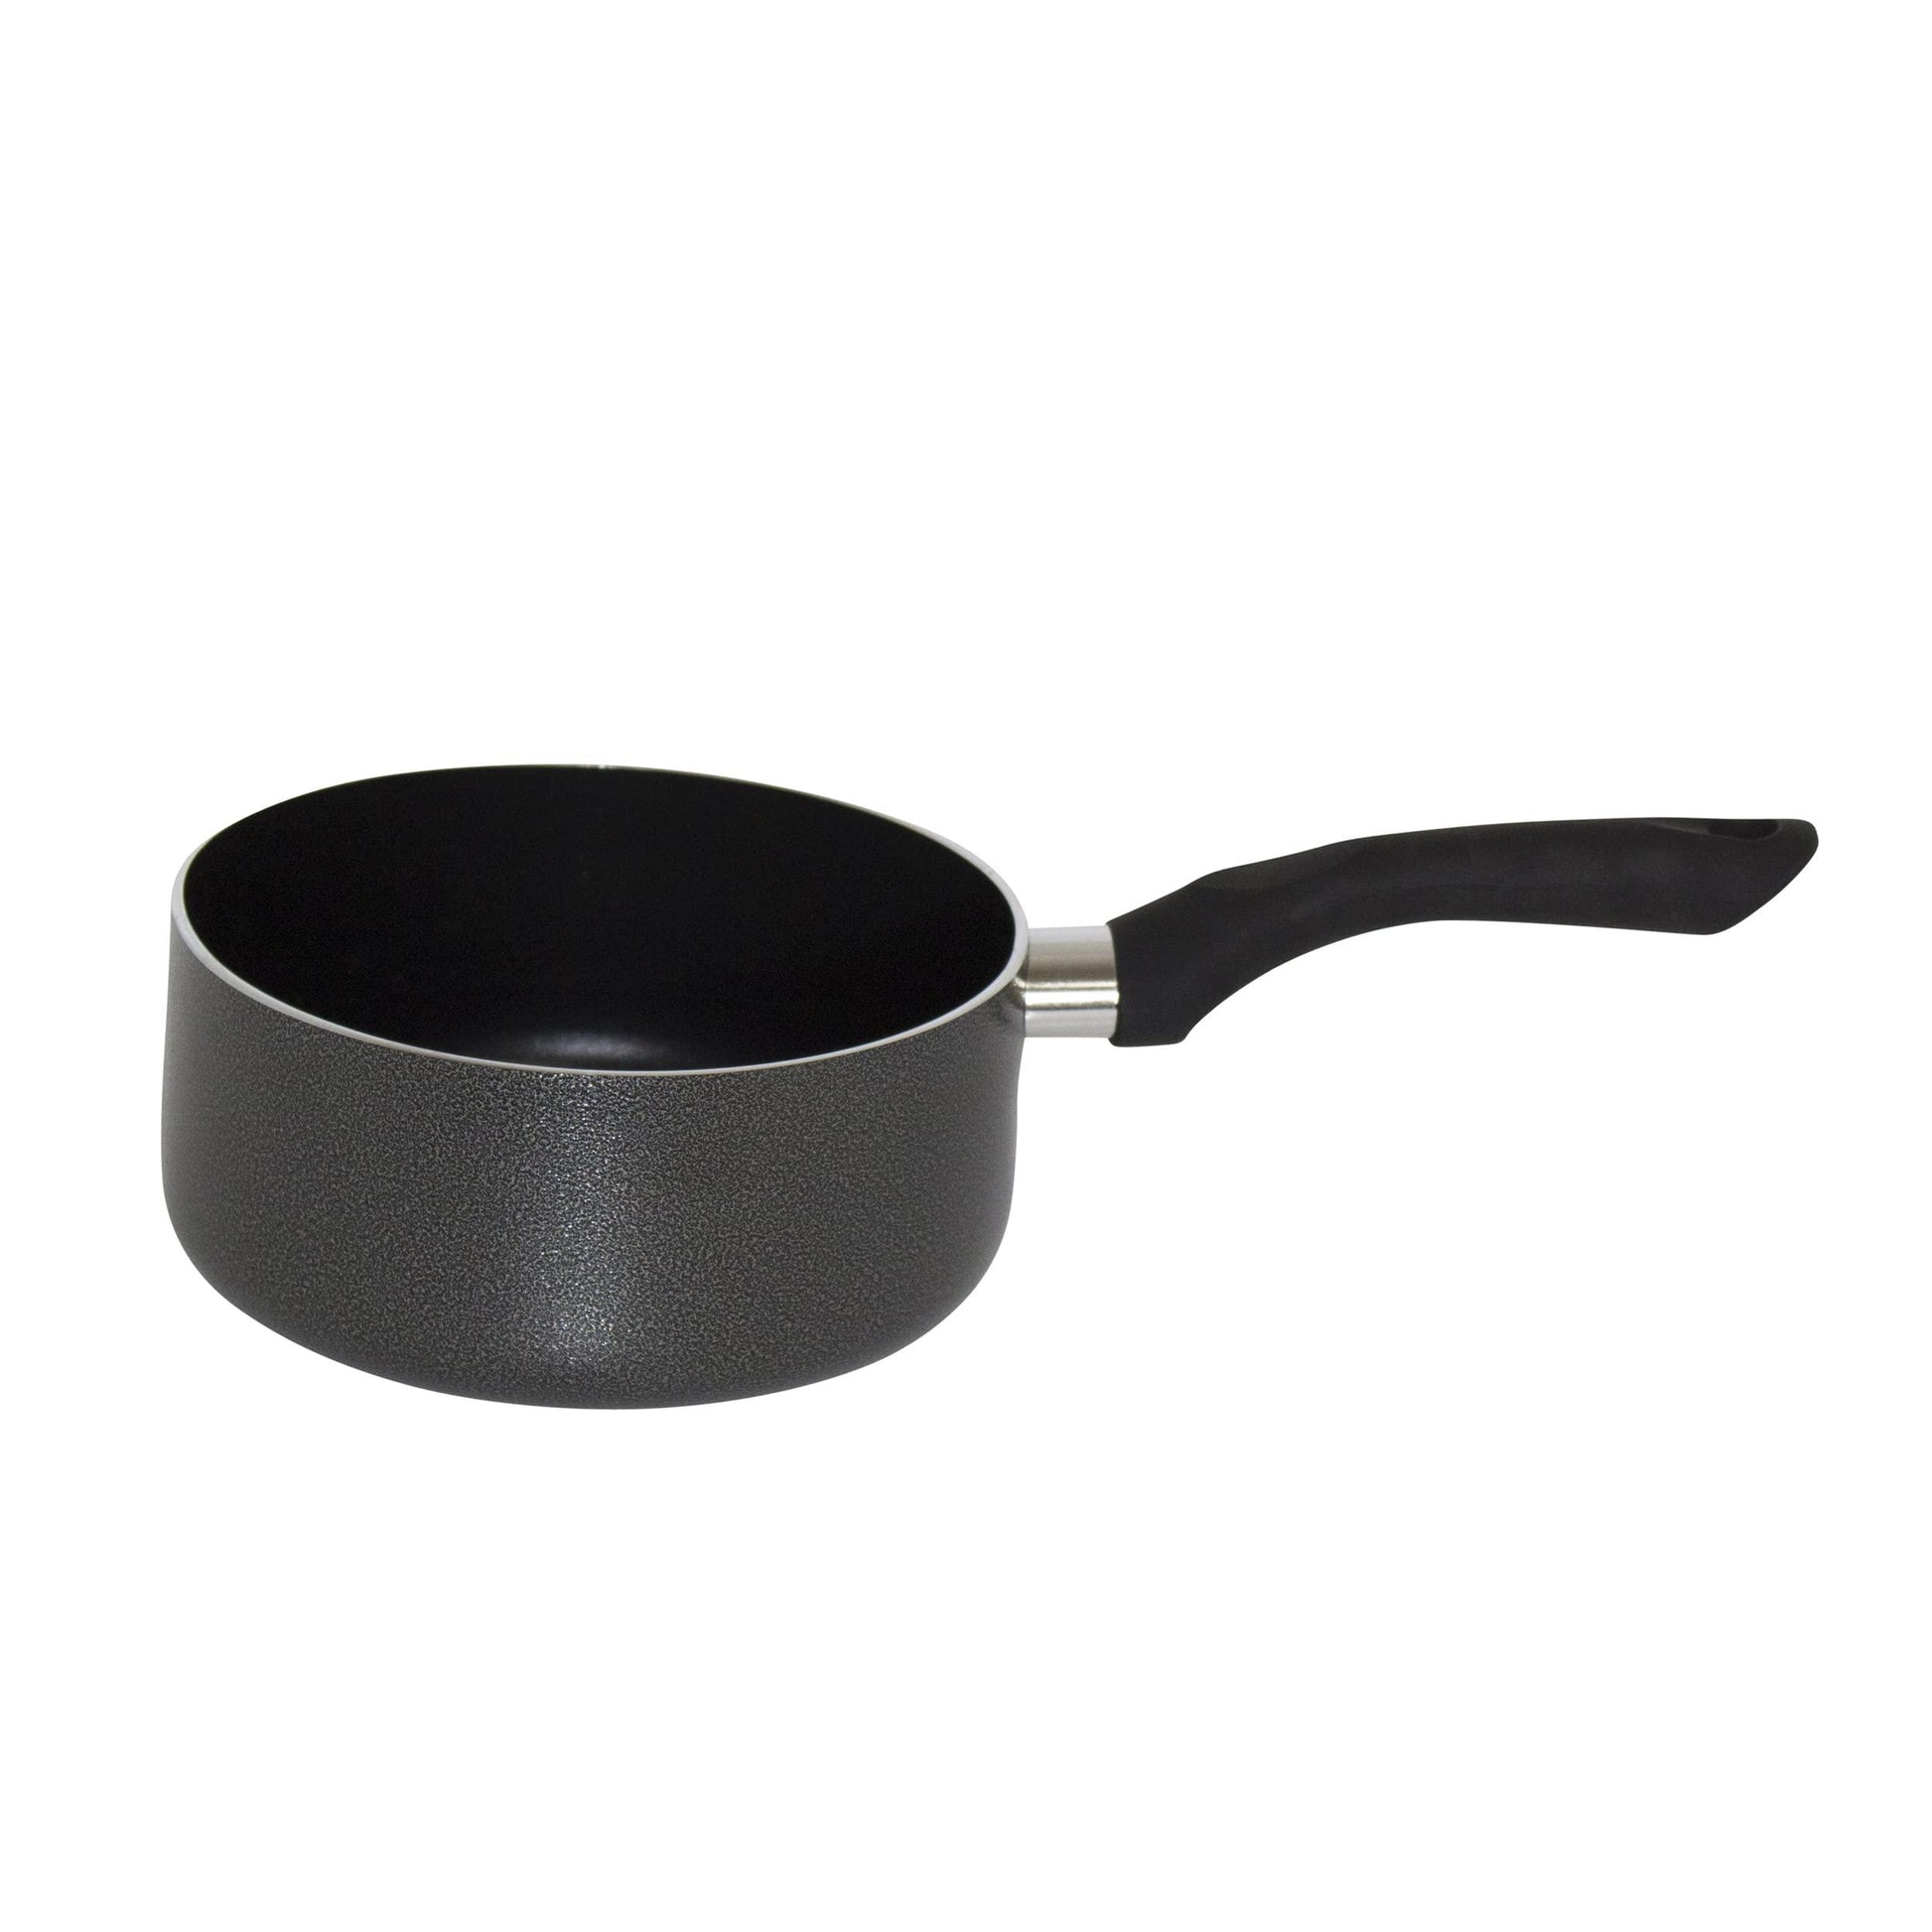 IMUSA USA 2 Quart Charcoal Exterior Sauce Pan with Nonstick Interior and Black Soft-Touch Handle - CookCave